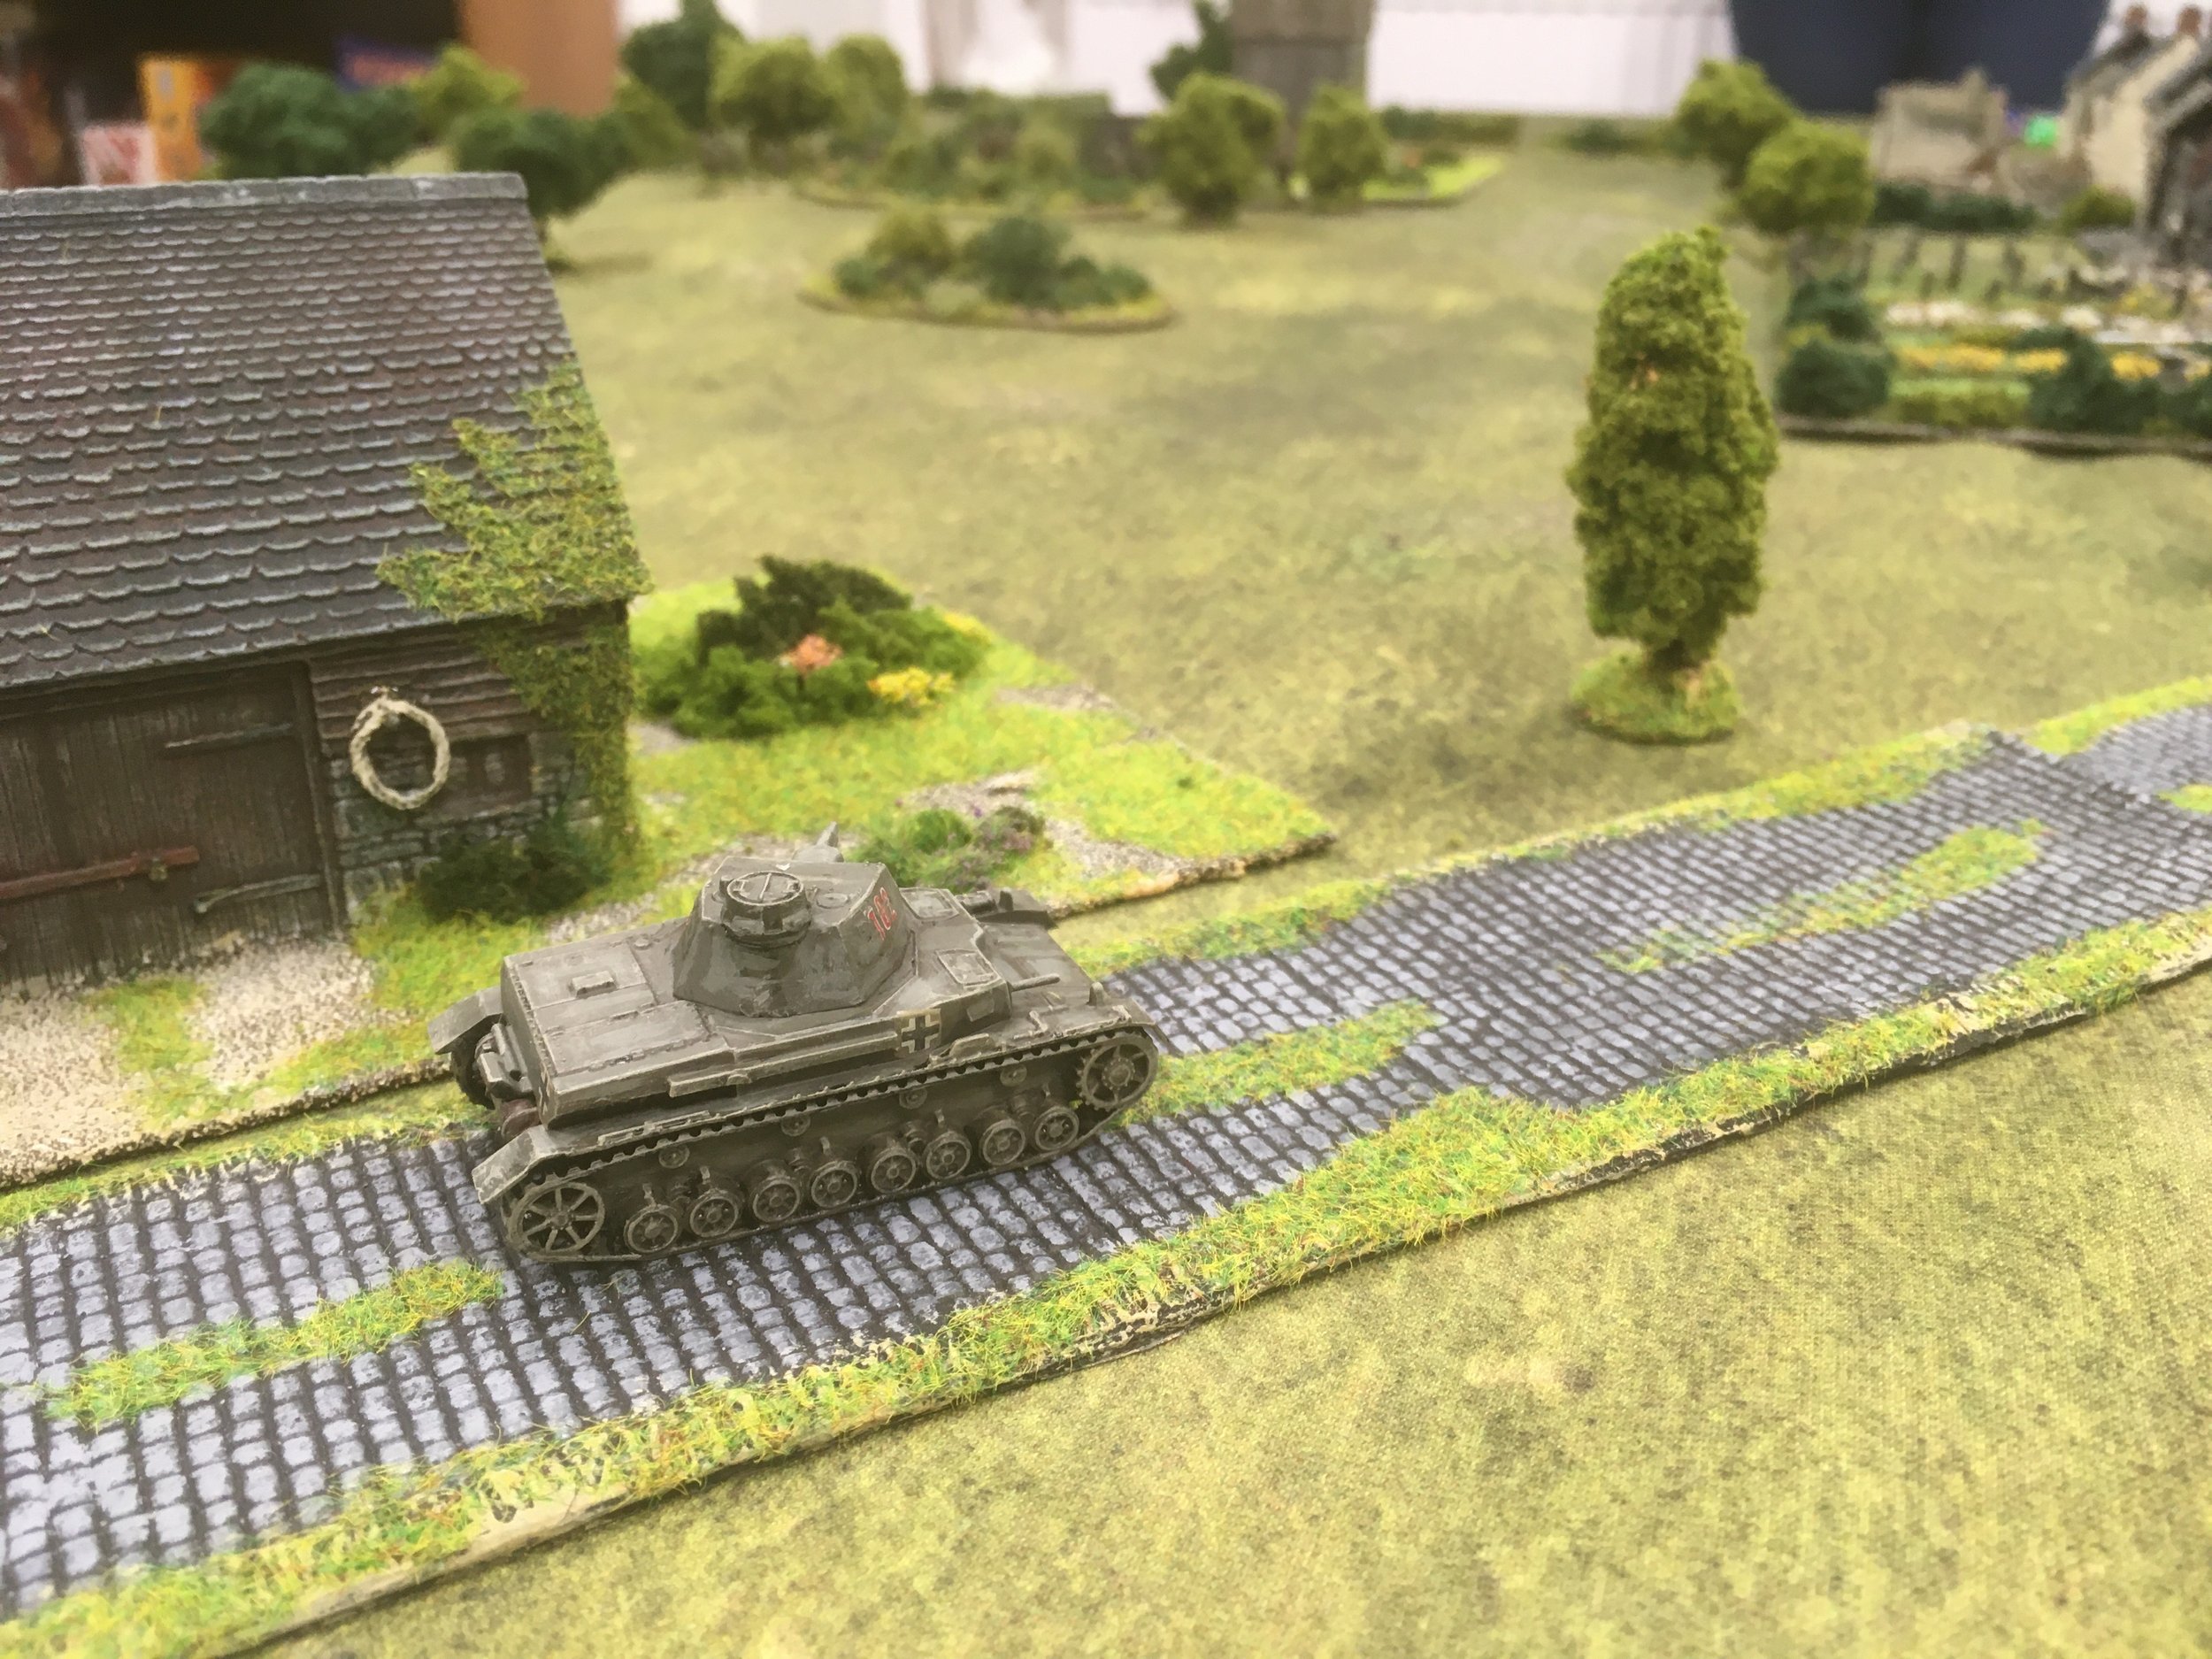 Advancing towards the village, the German tank looses off a couple of rounds at the French on the hill...